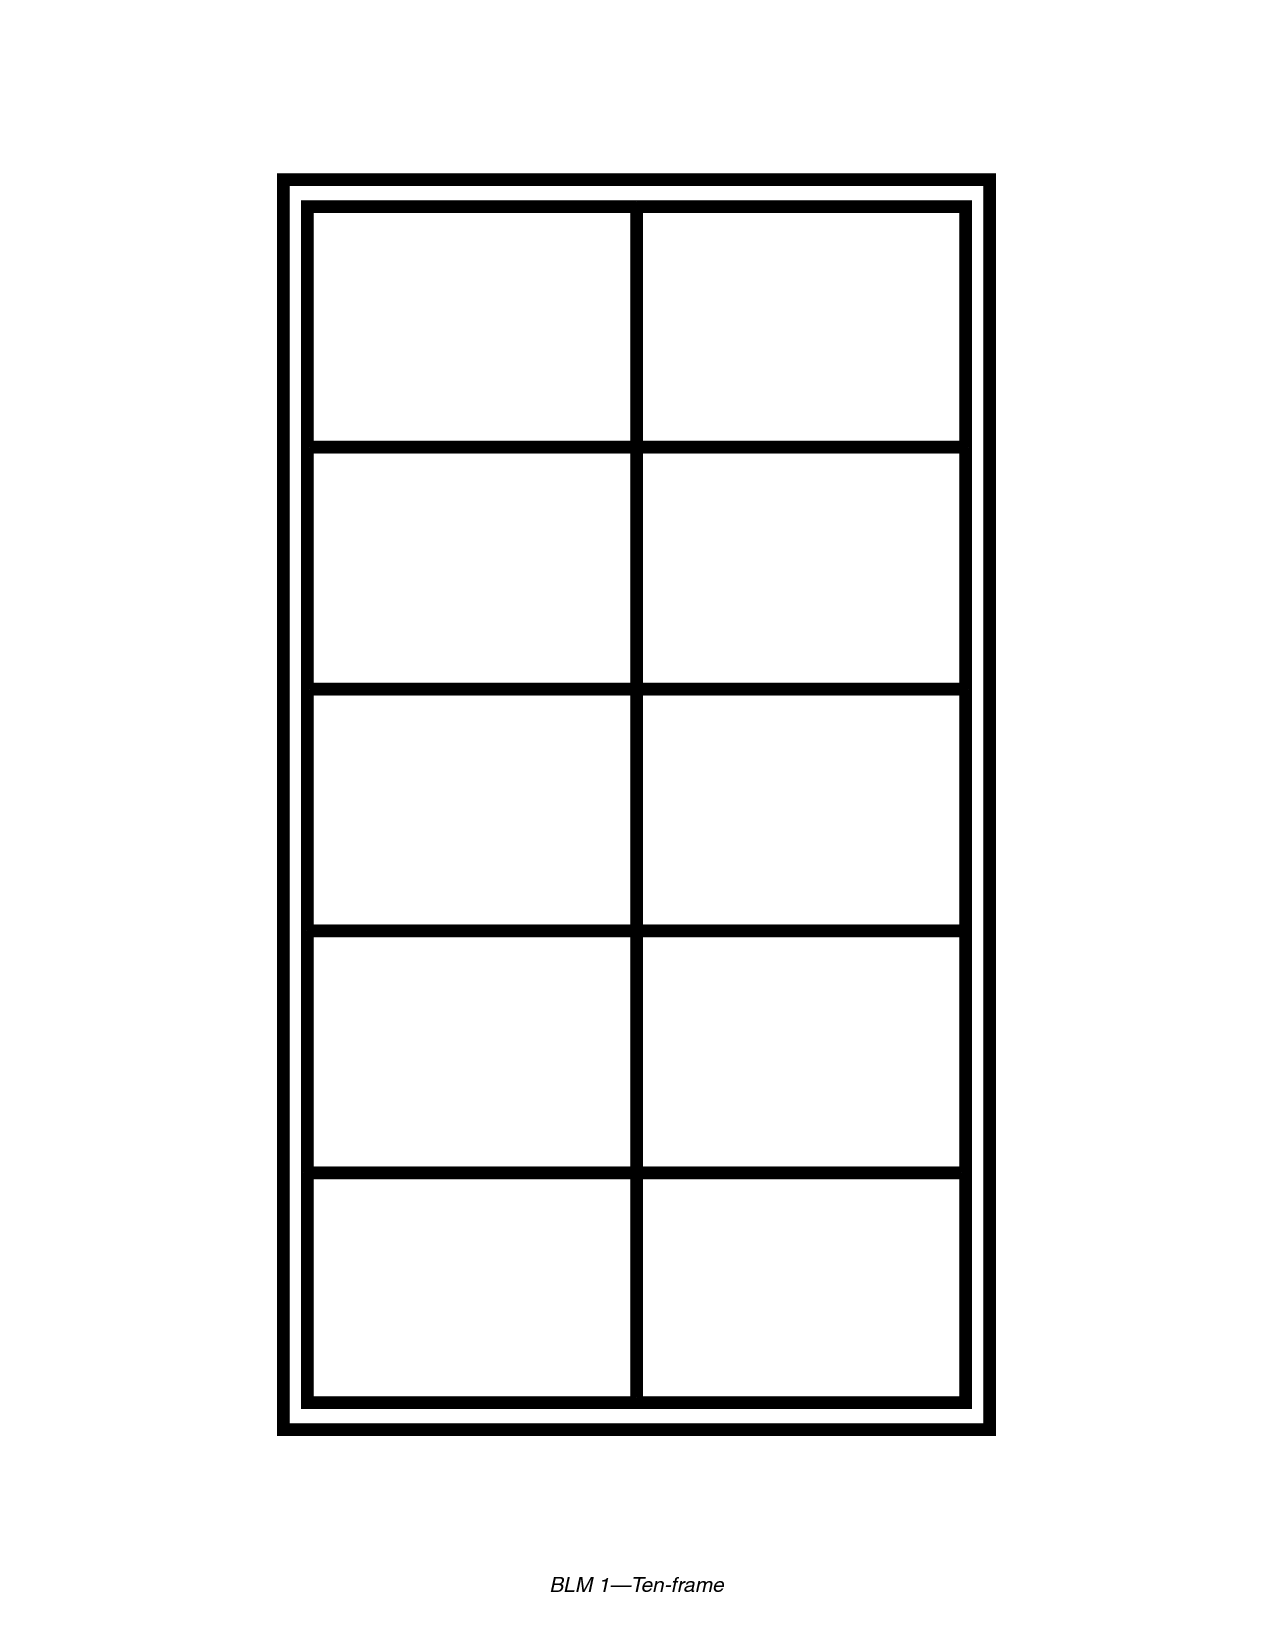 Ten frame template clipart black and white